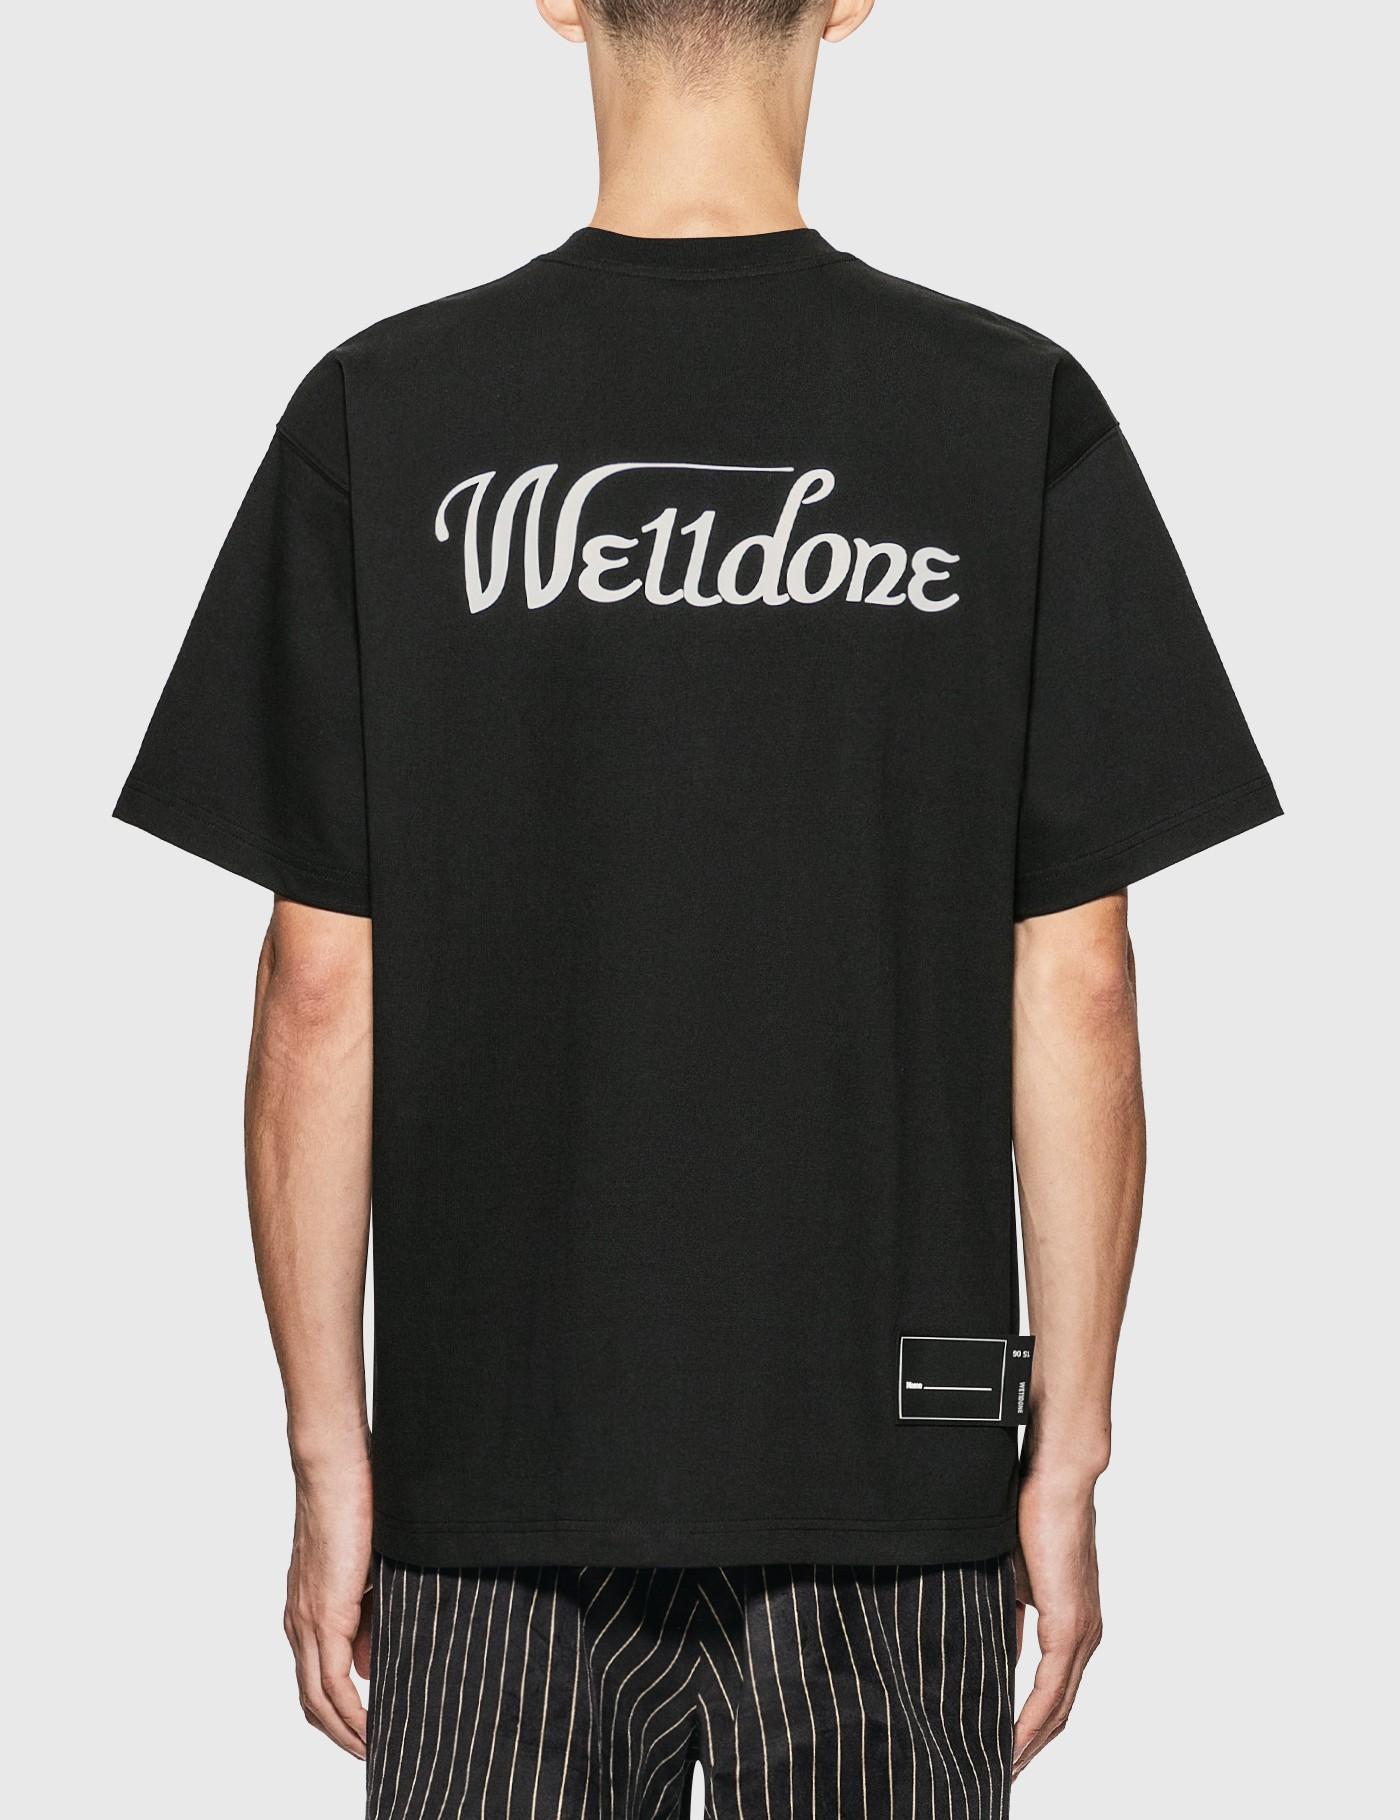 we11done Reflective Logo T-shirt in Black for Men - Lyst